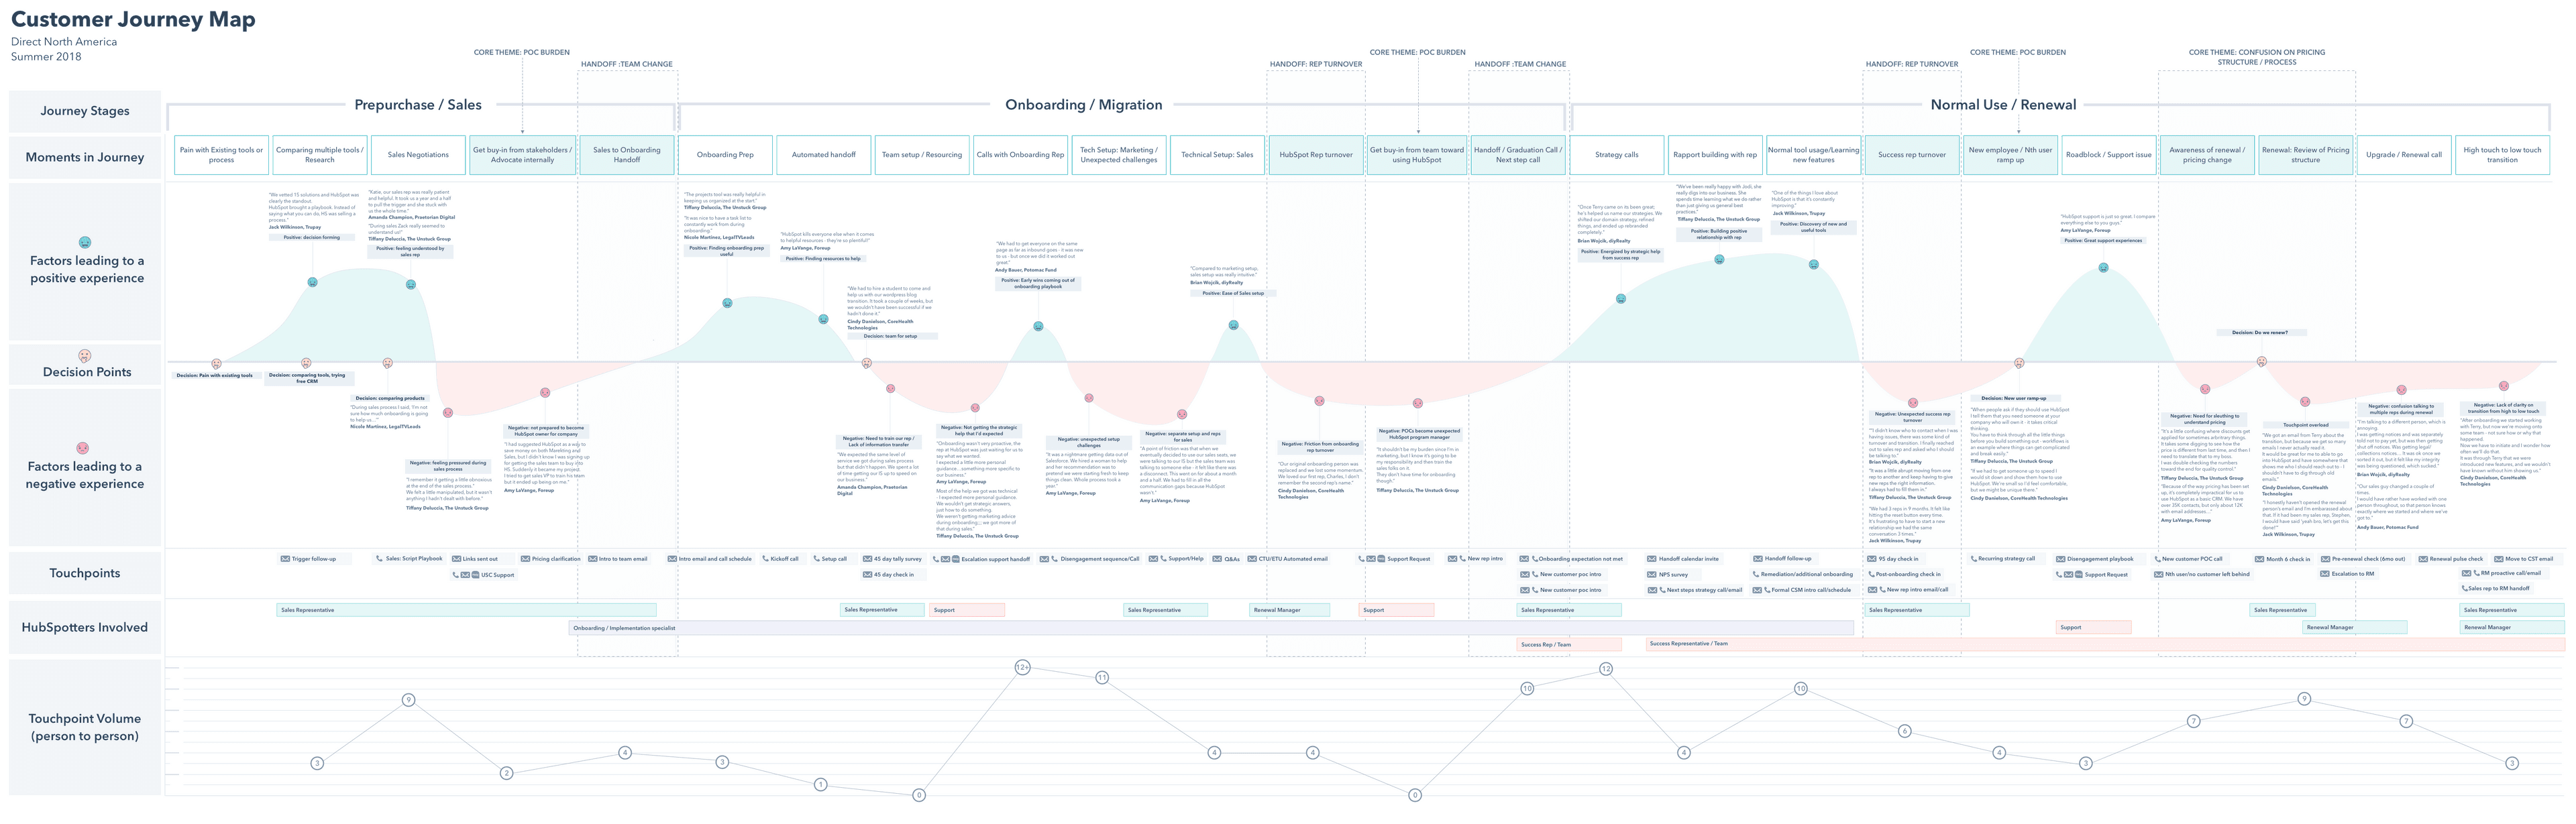 HubSpot Customer Journey Map with Touch Points